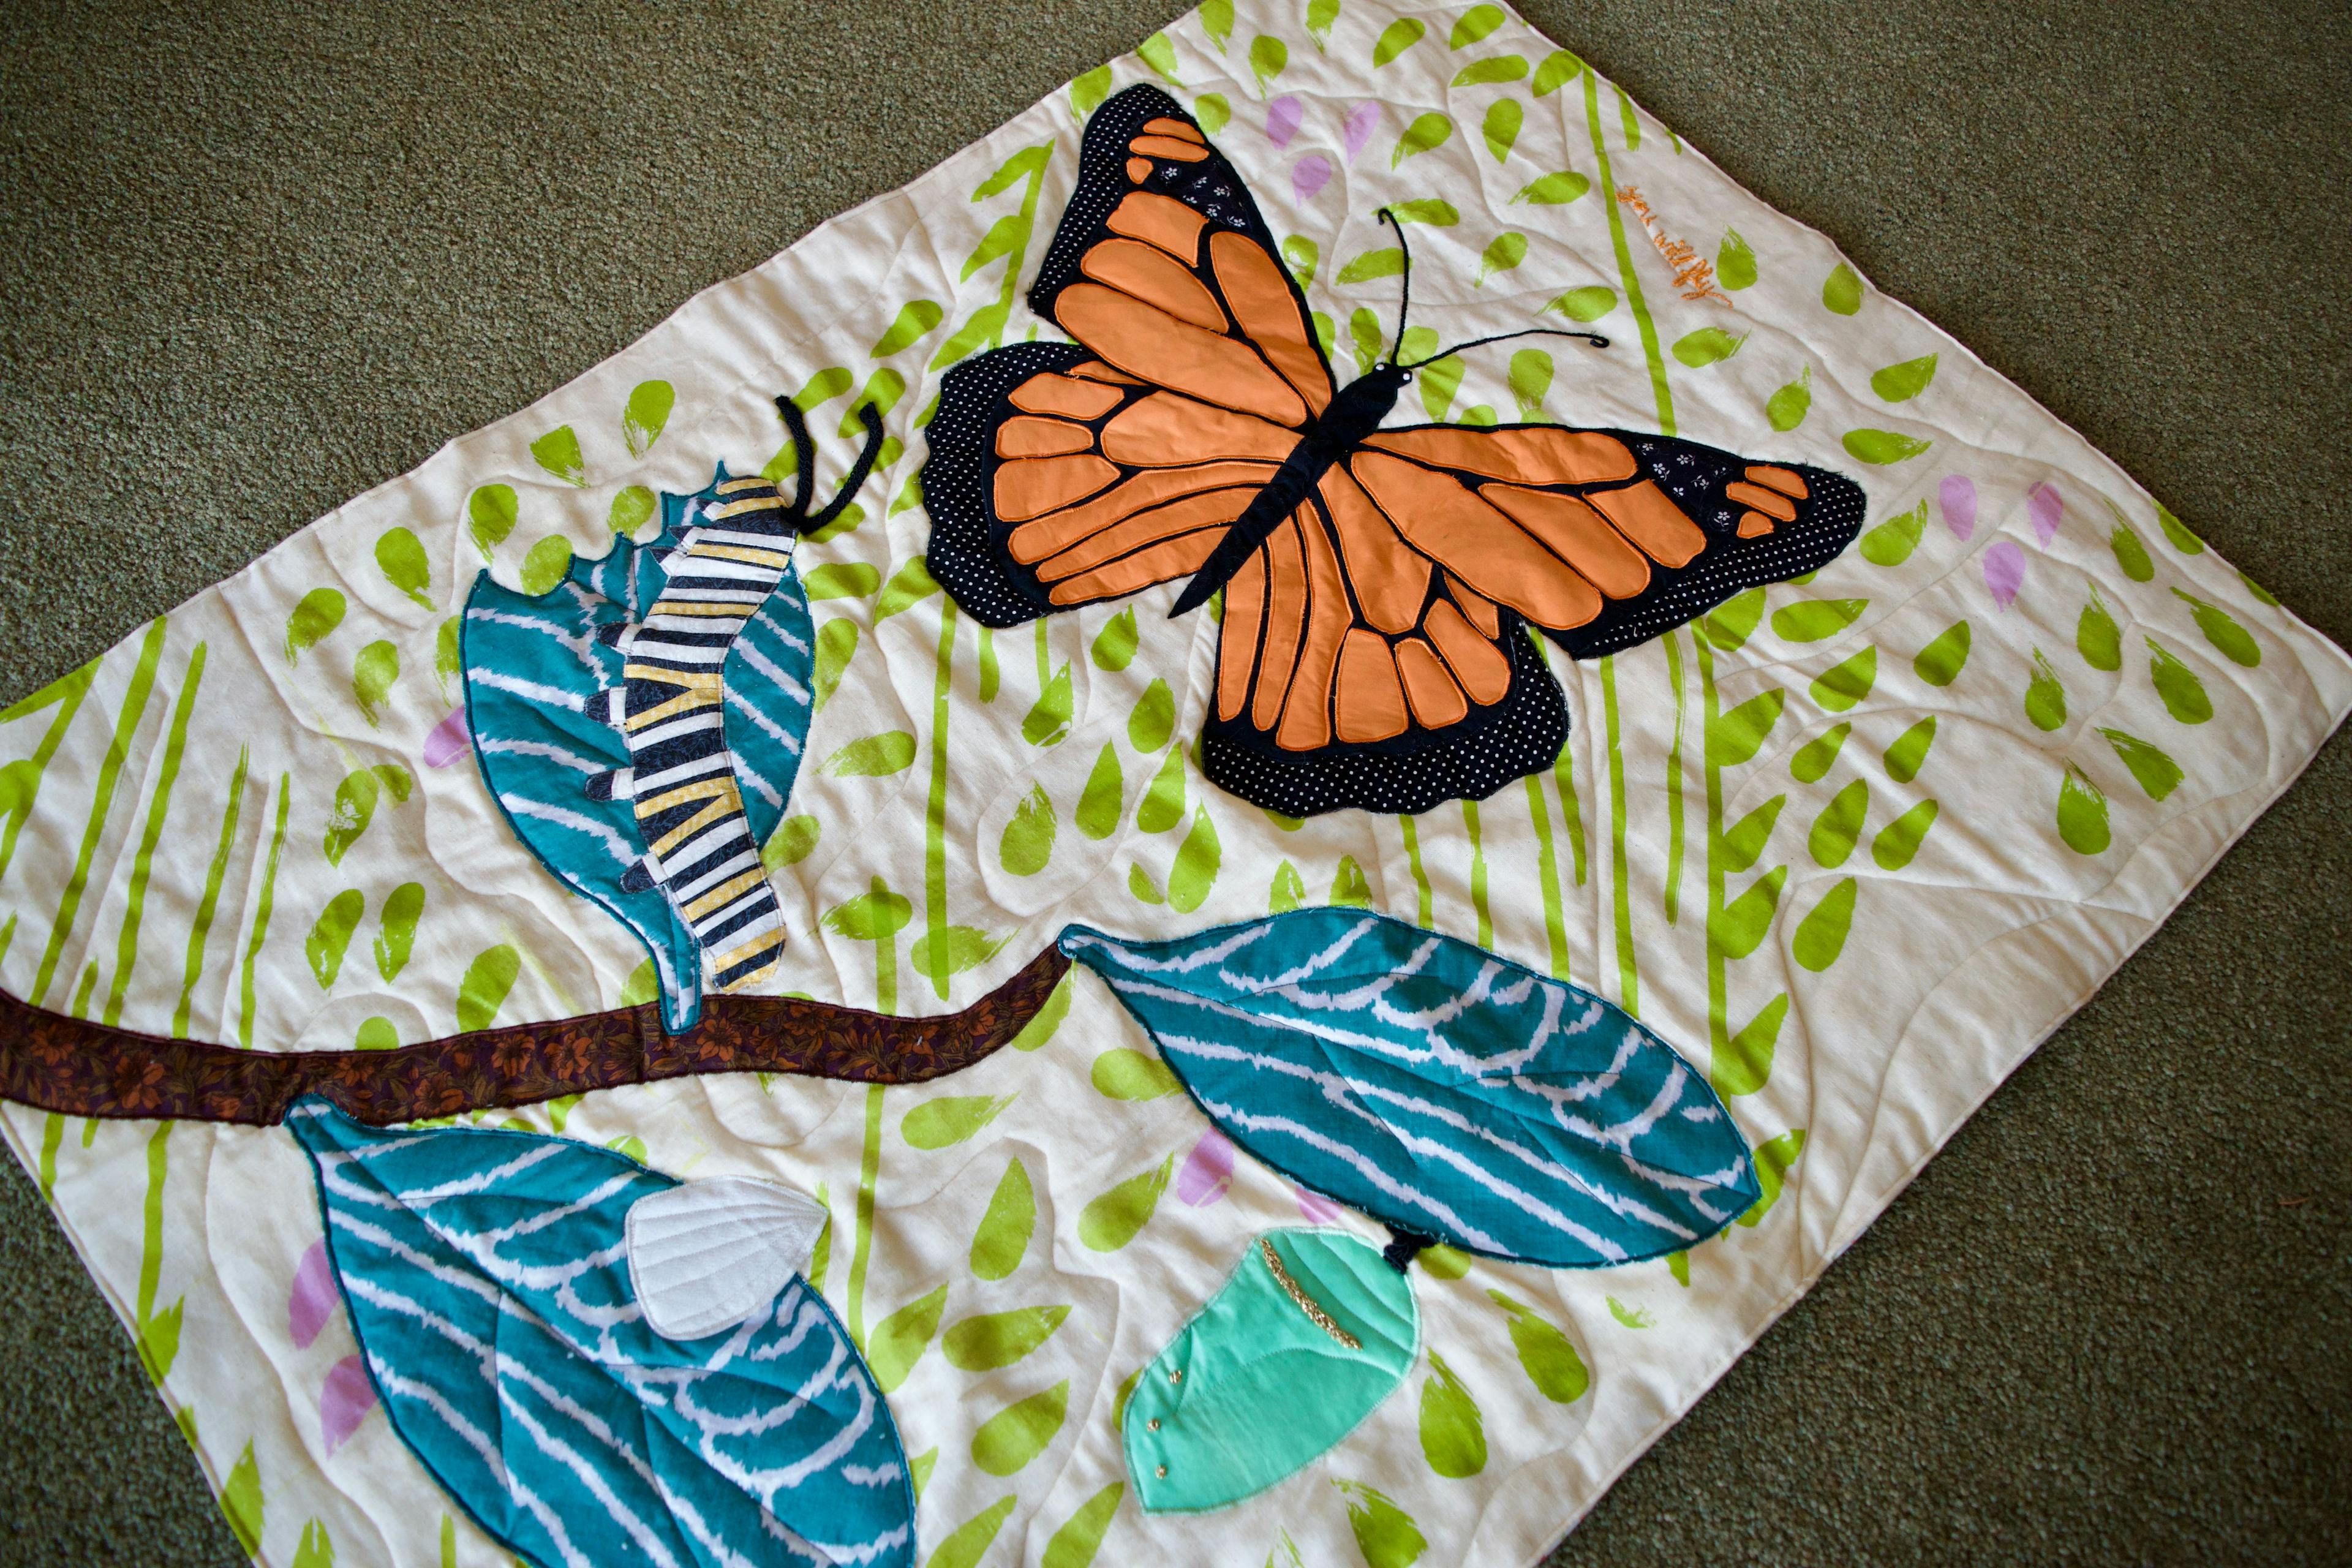 A quilt showing the life cycle of a butterfly